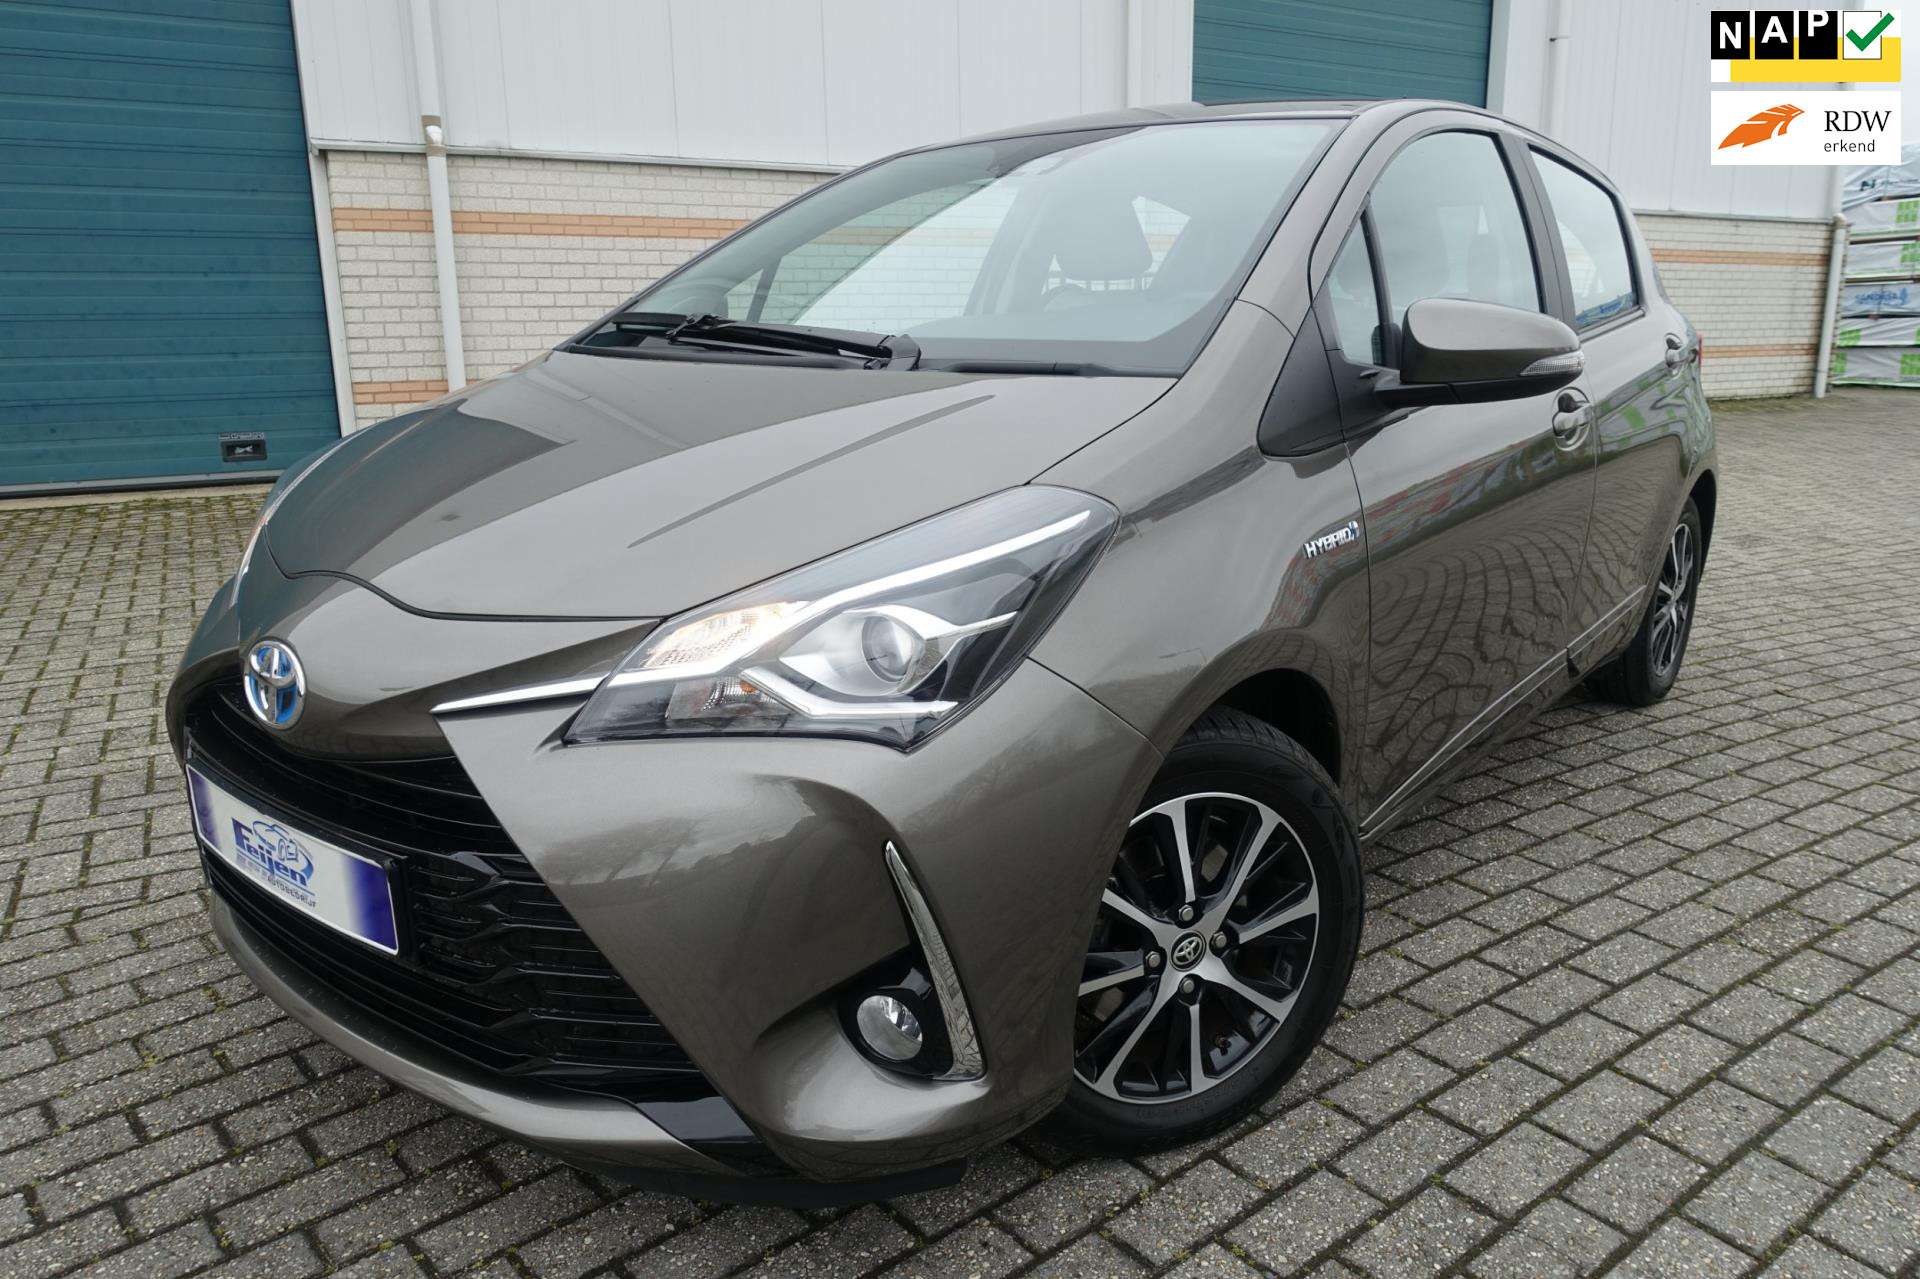 Toyota Yaris Compact in Grey used in BUDEL for € 17,995.-